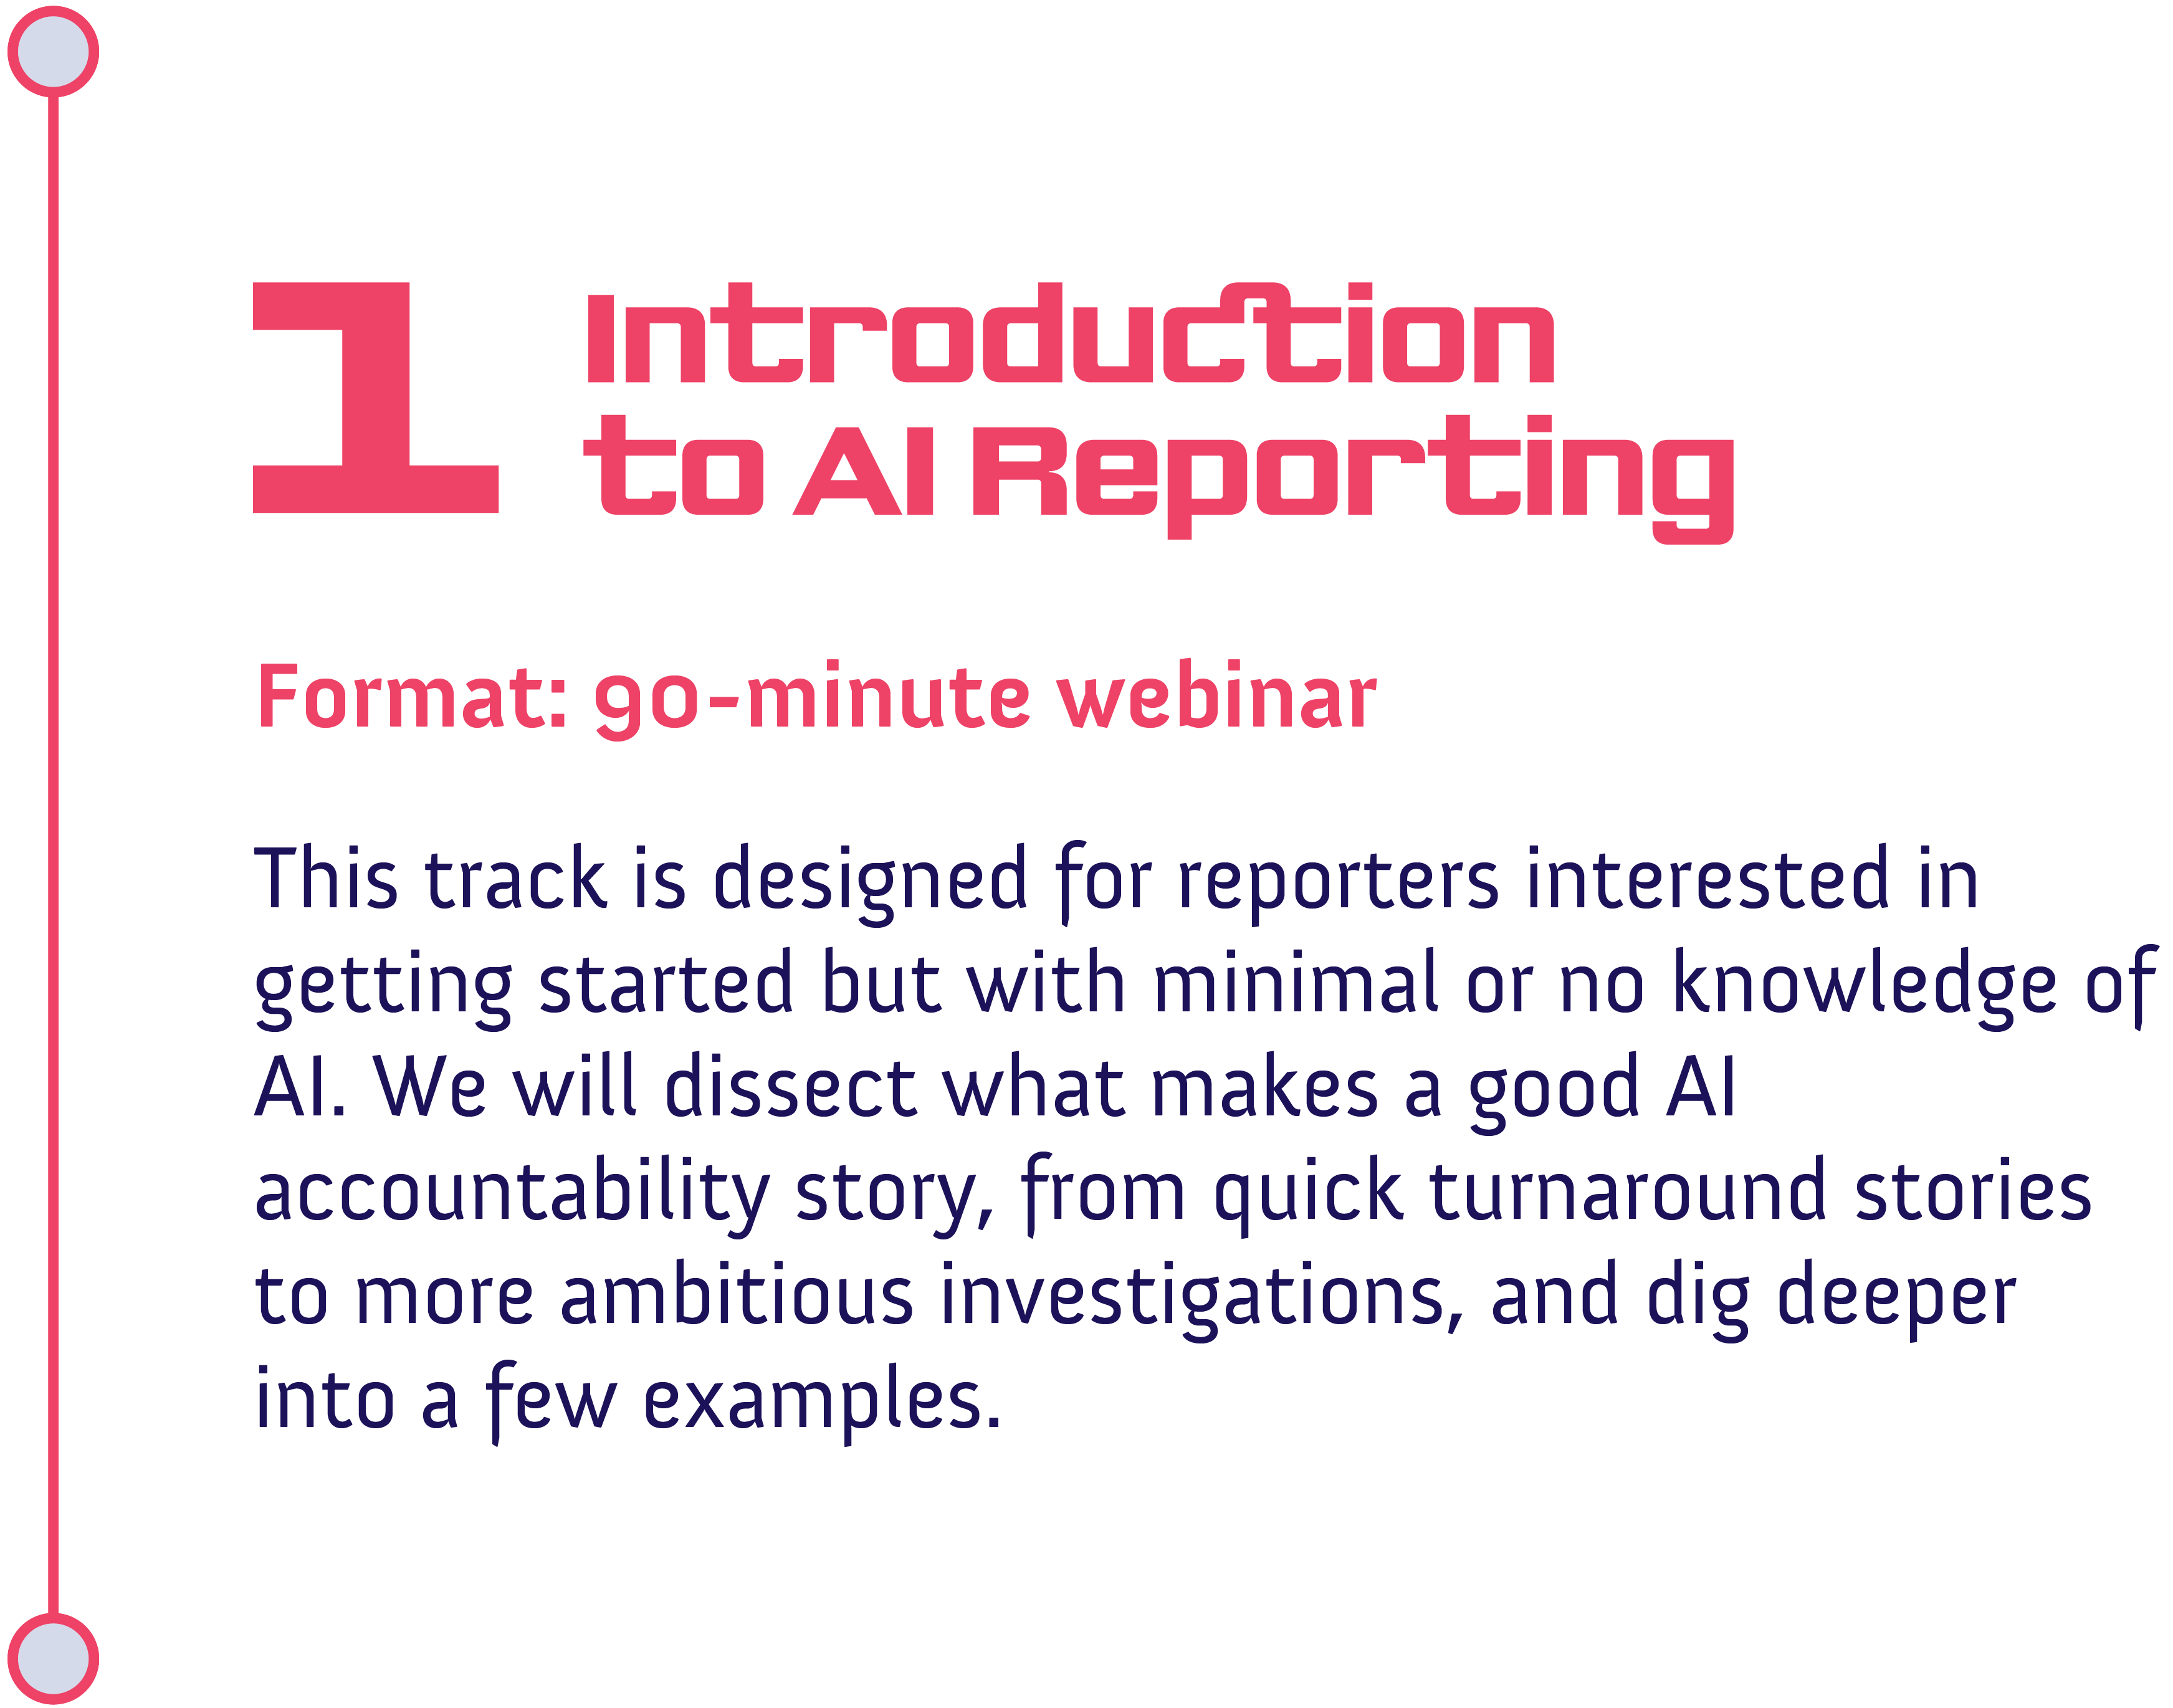 Track 1: Introduction to AI Reporting<br />
Format: 90-minute webinar<br />
This track is designed for reporters interested in getting started but with minimal or no knowledge of AI. We will dissect what makes a good AI accountability story, from quick turnaround stories to more ambitious investigations, and dig deeper into a few examples.